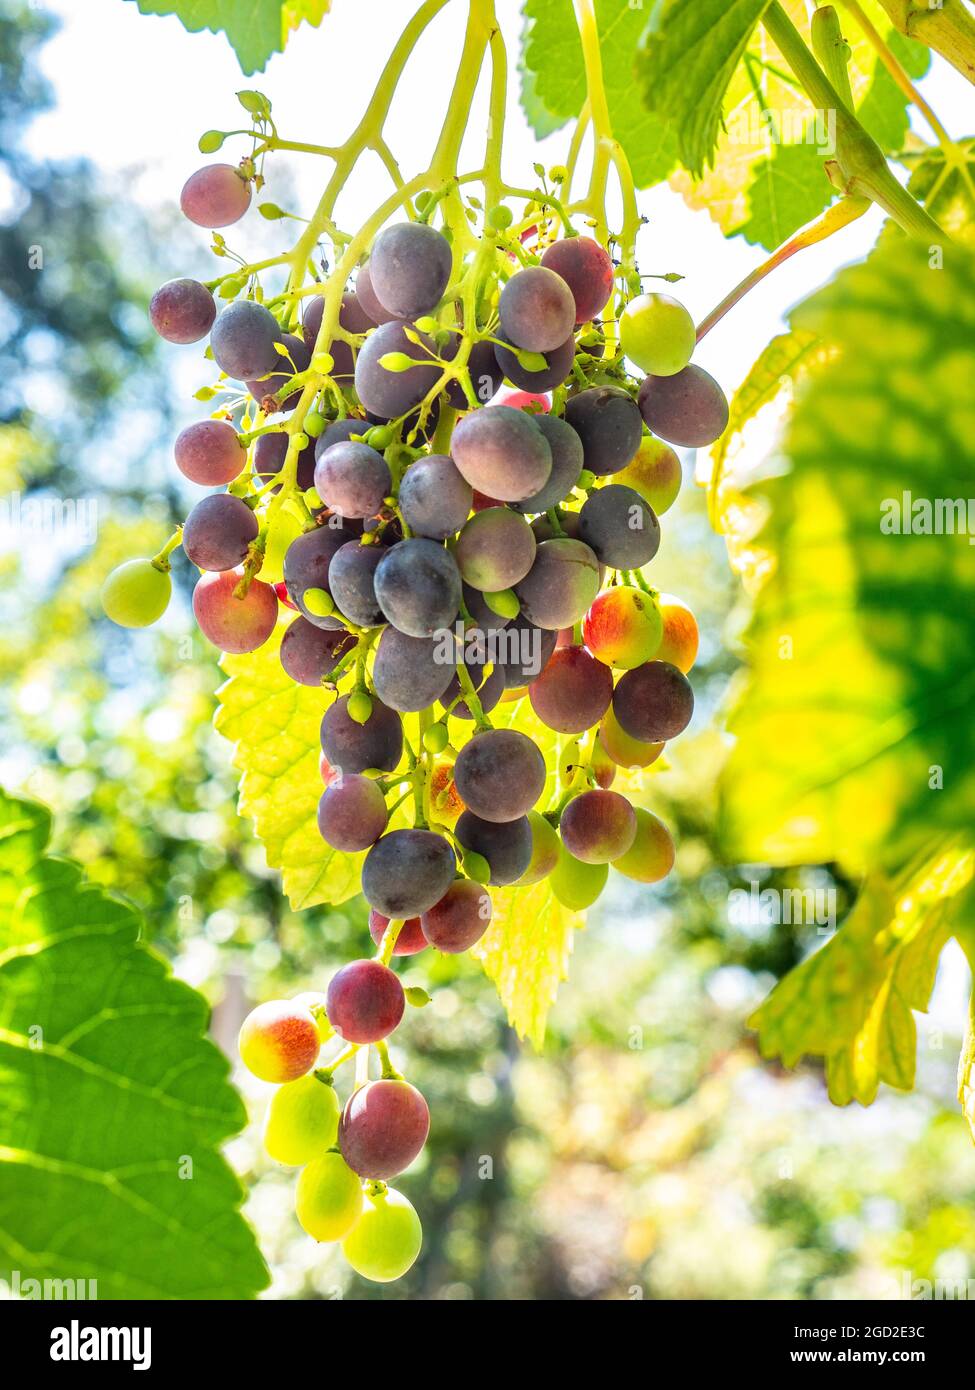 Gagarin Blue Grapes ripening on the vine in perfect conditions Vitis “Gagarin Blue” is a red-seeded grape for dessert use or wine a hardy Russian type Stock Photo